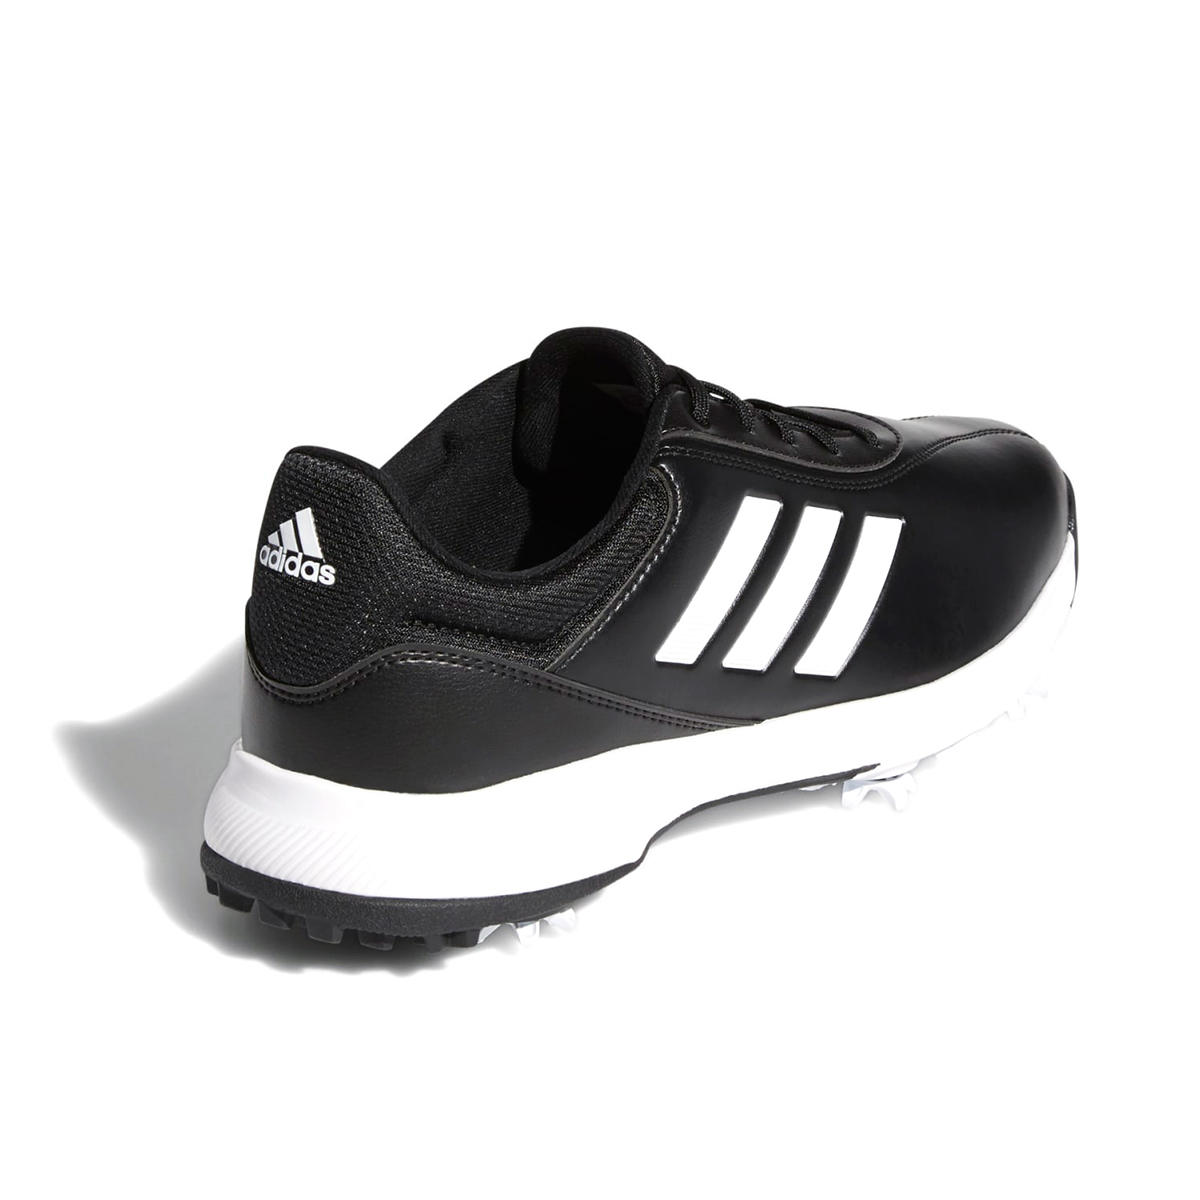 adidas Golf Traxion Lite Shoes from american golf